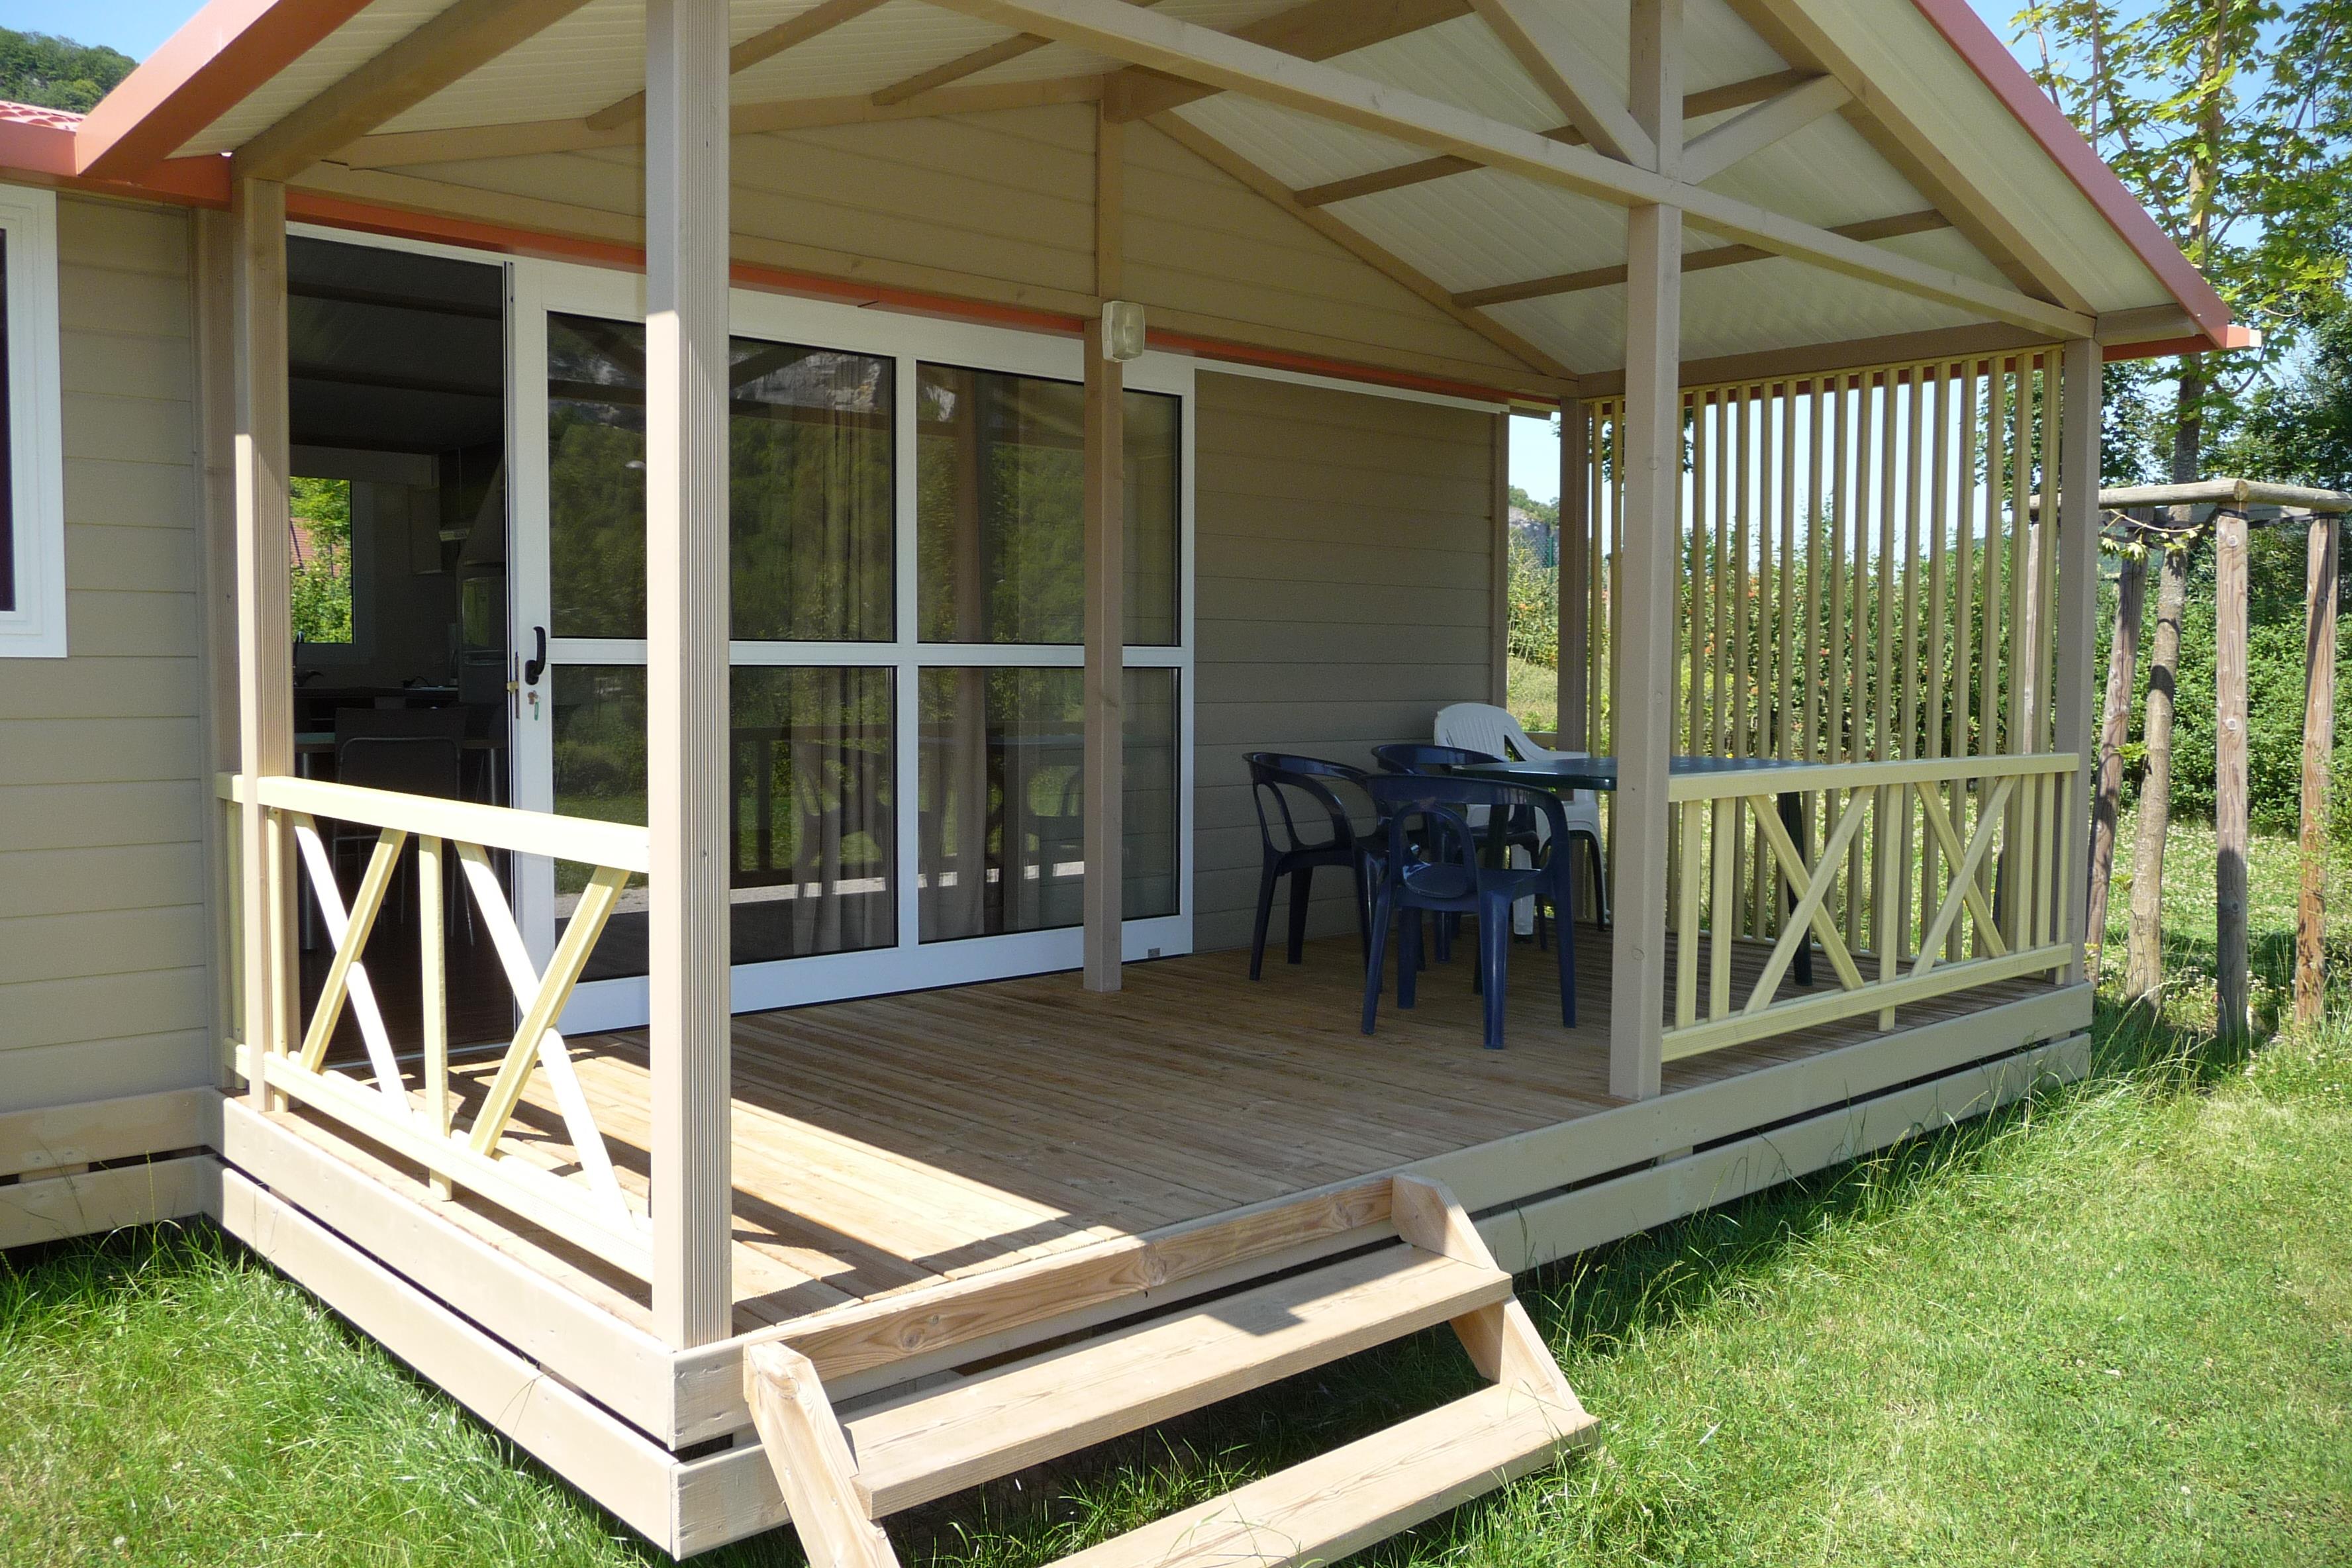 Accommodation - Cottage Comtois, 35M², 3 Rooms, The Family Country Cottage - Camping Ecologique LA ROCHE D'ULLY